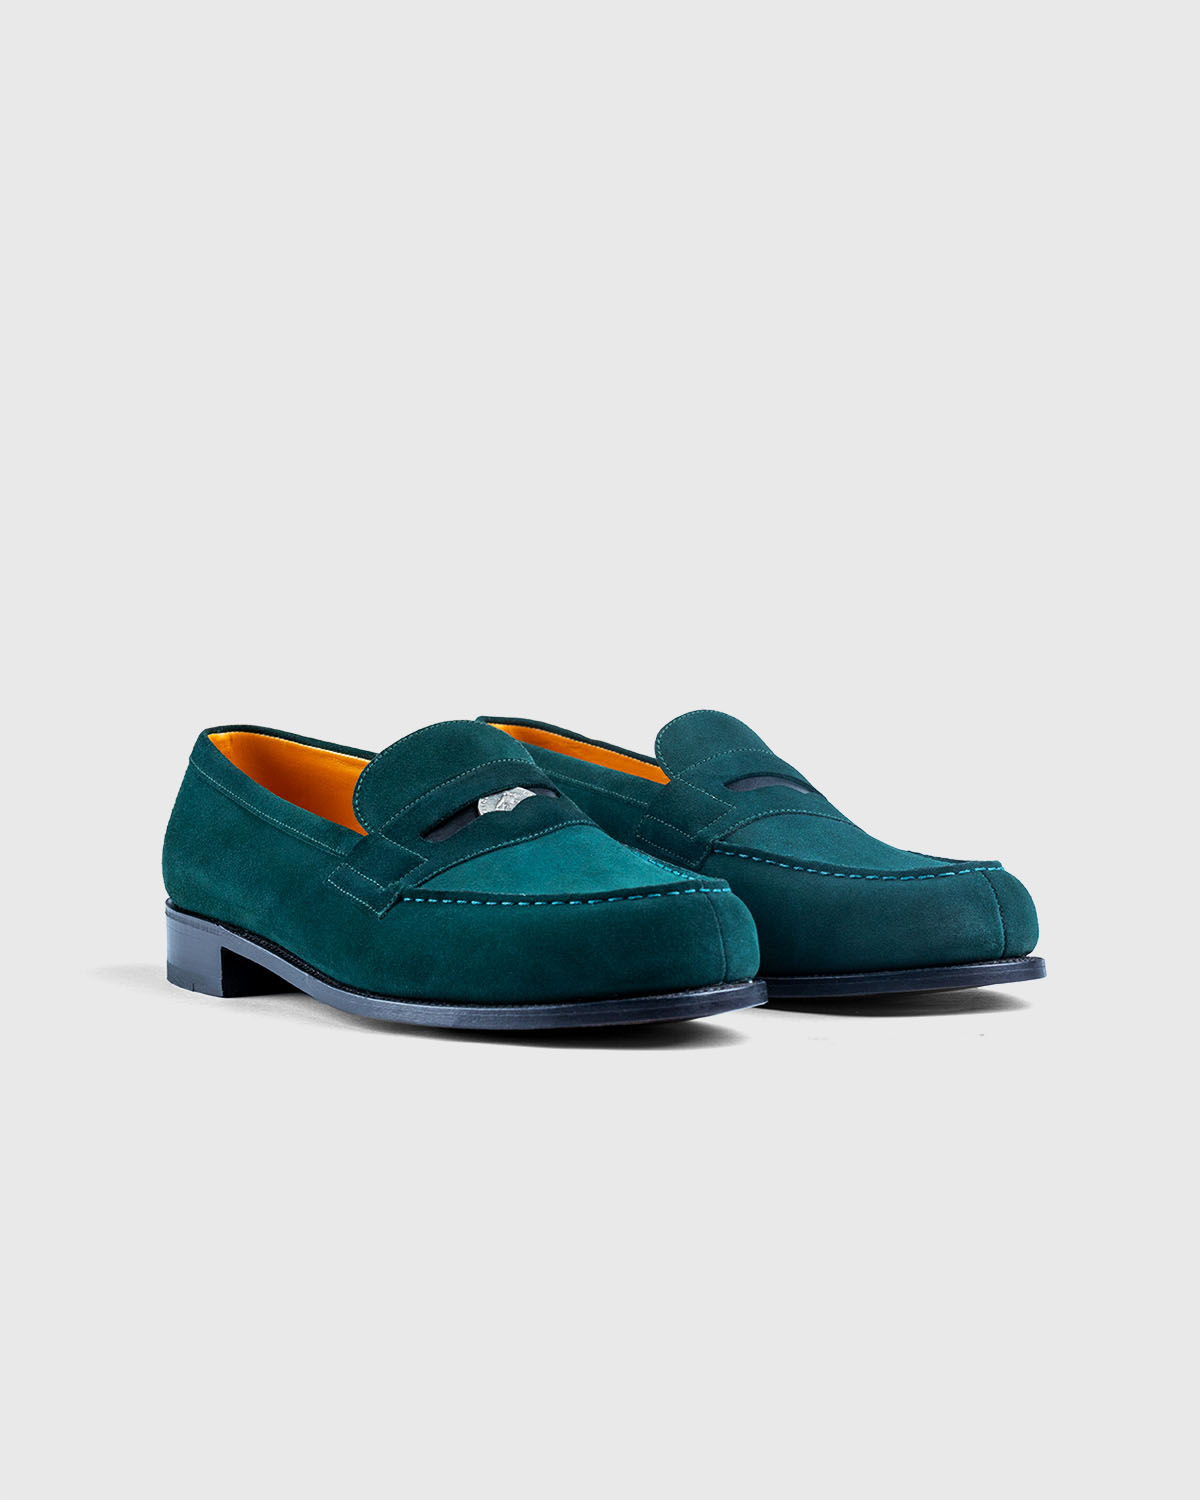 not-in-paris-releases-jm-westion-loafer-02